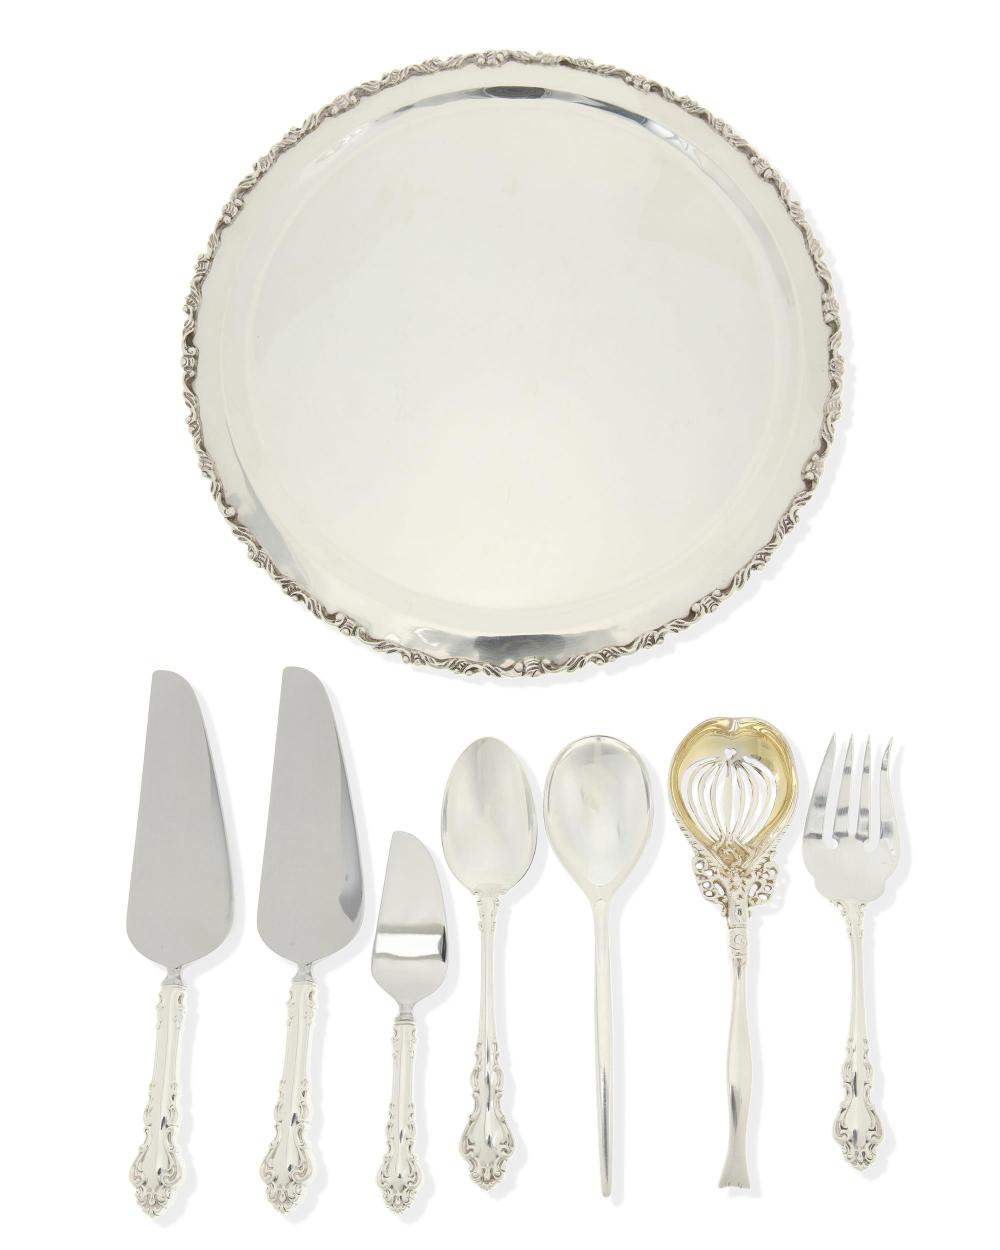 A GROUP OF STERLING SILVER SERVING